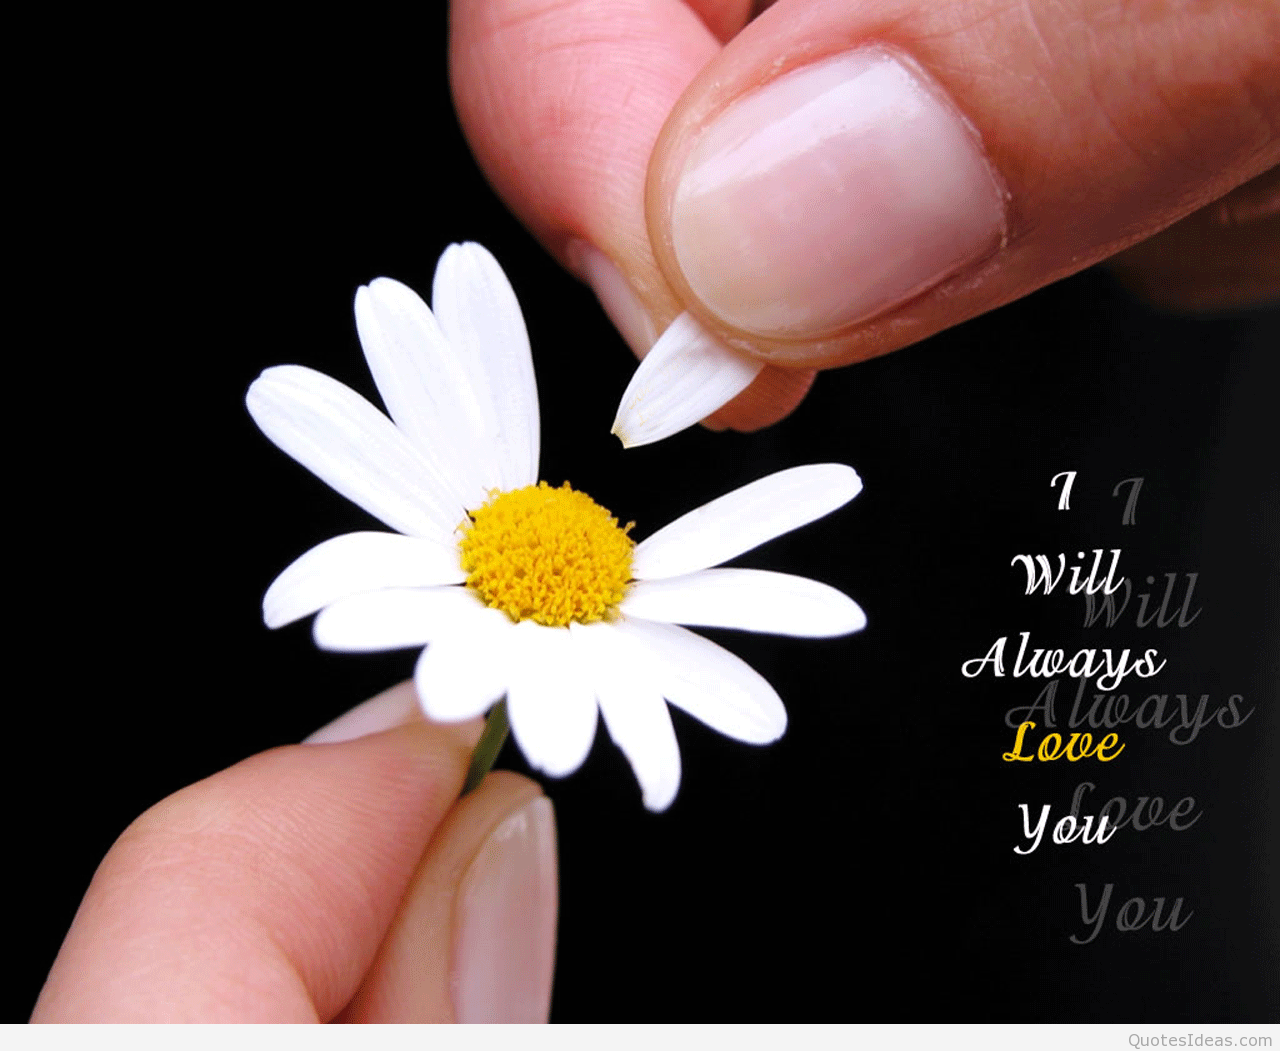 love wallpapers and quotes,chamomile,petal,flower,daisy,oxeye daisy